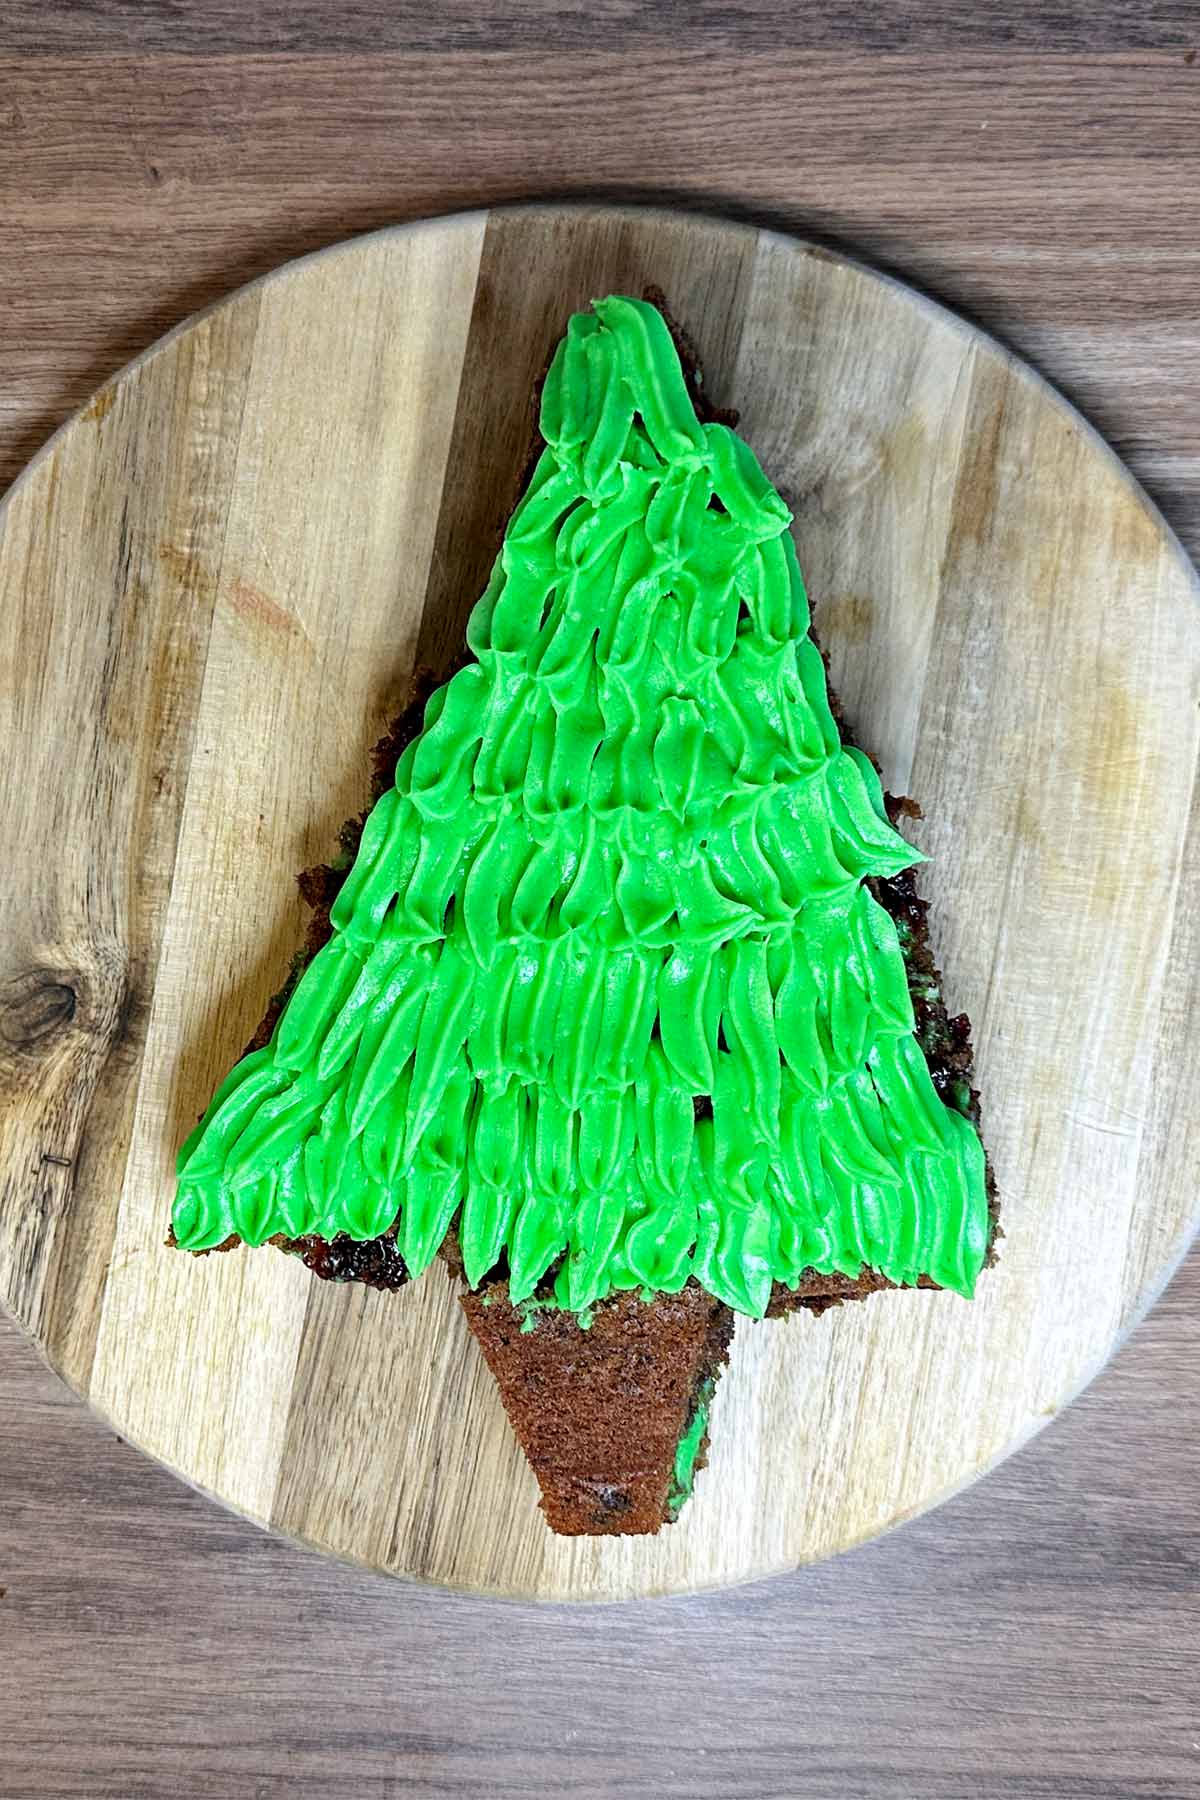 A tree shaped chocolate cake topped with green icing made to look like leaves.